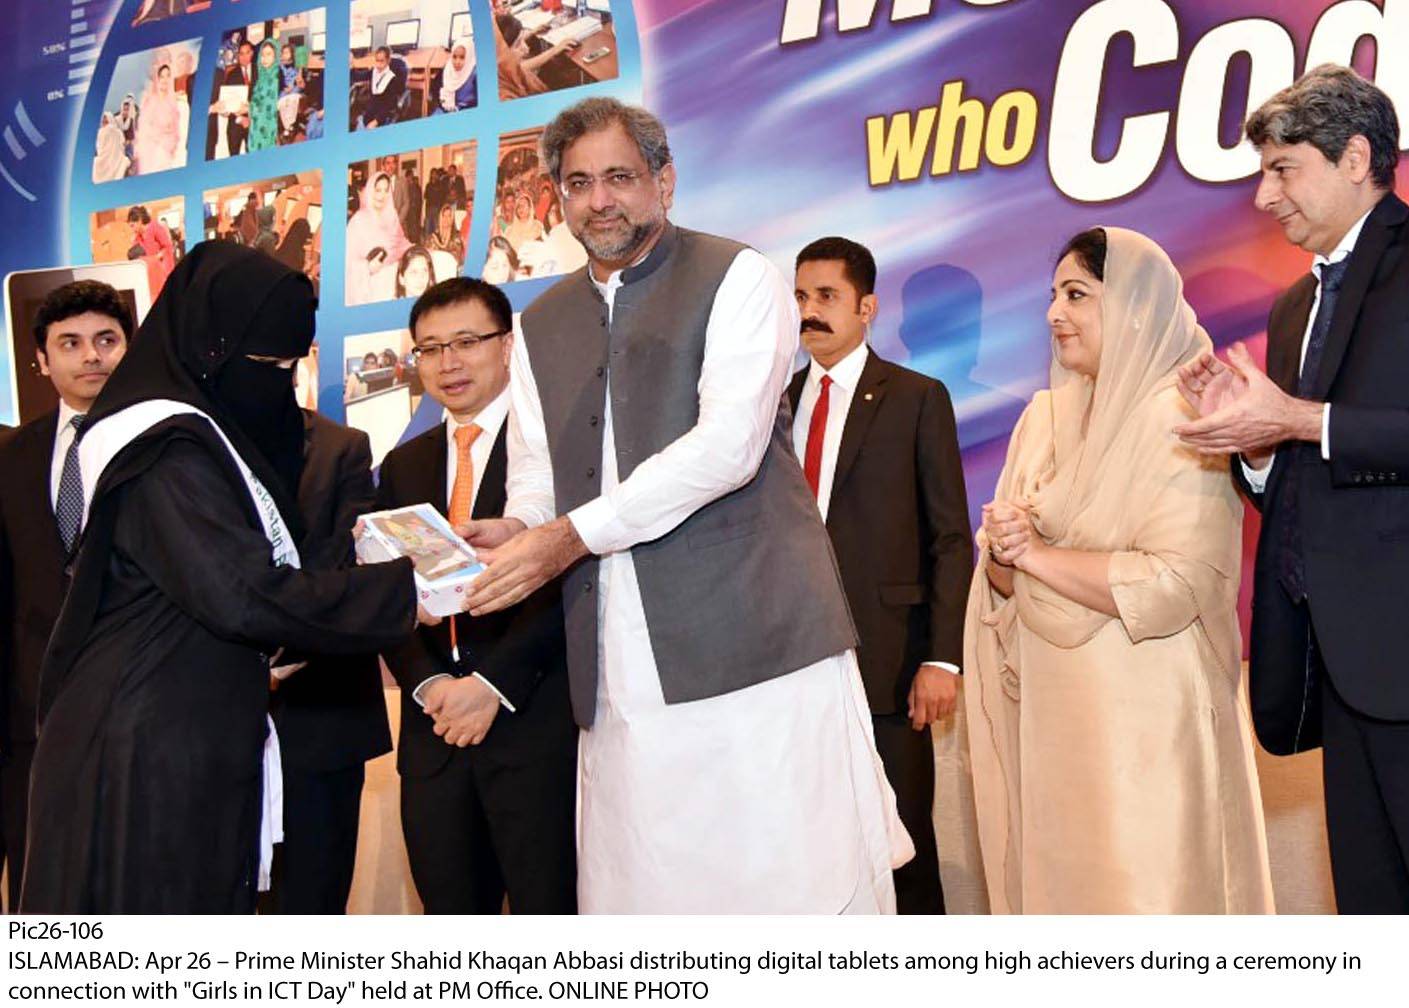 Prime Minister Shahid Khaqan Abbasi distributing digital tablets among high achievers during a ceremony in connection with “Girls in ICT Day” held at PM Office